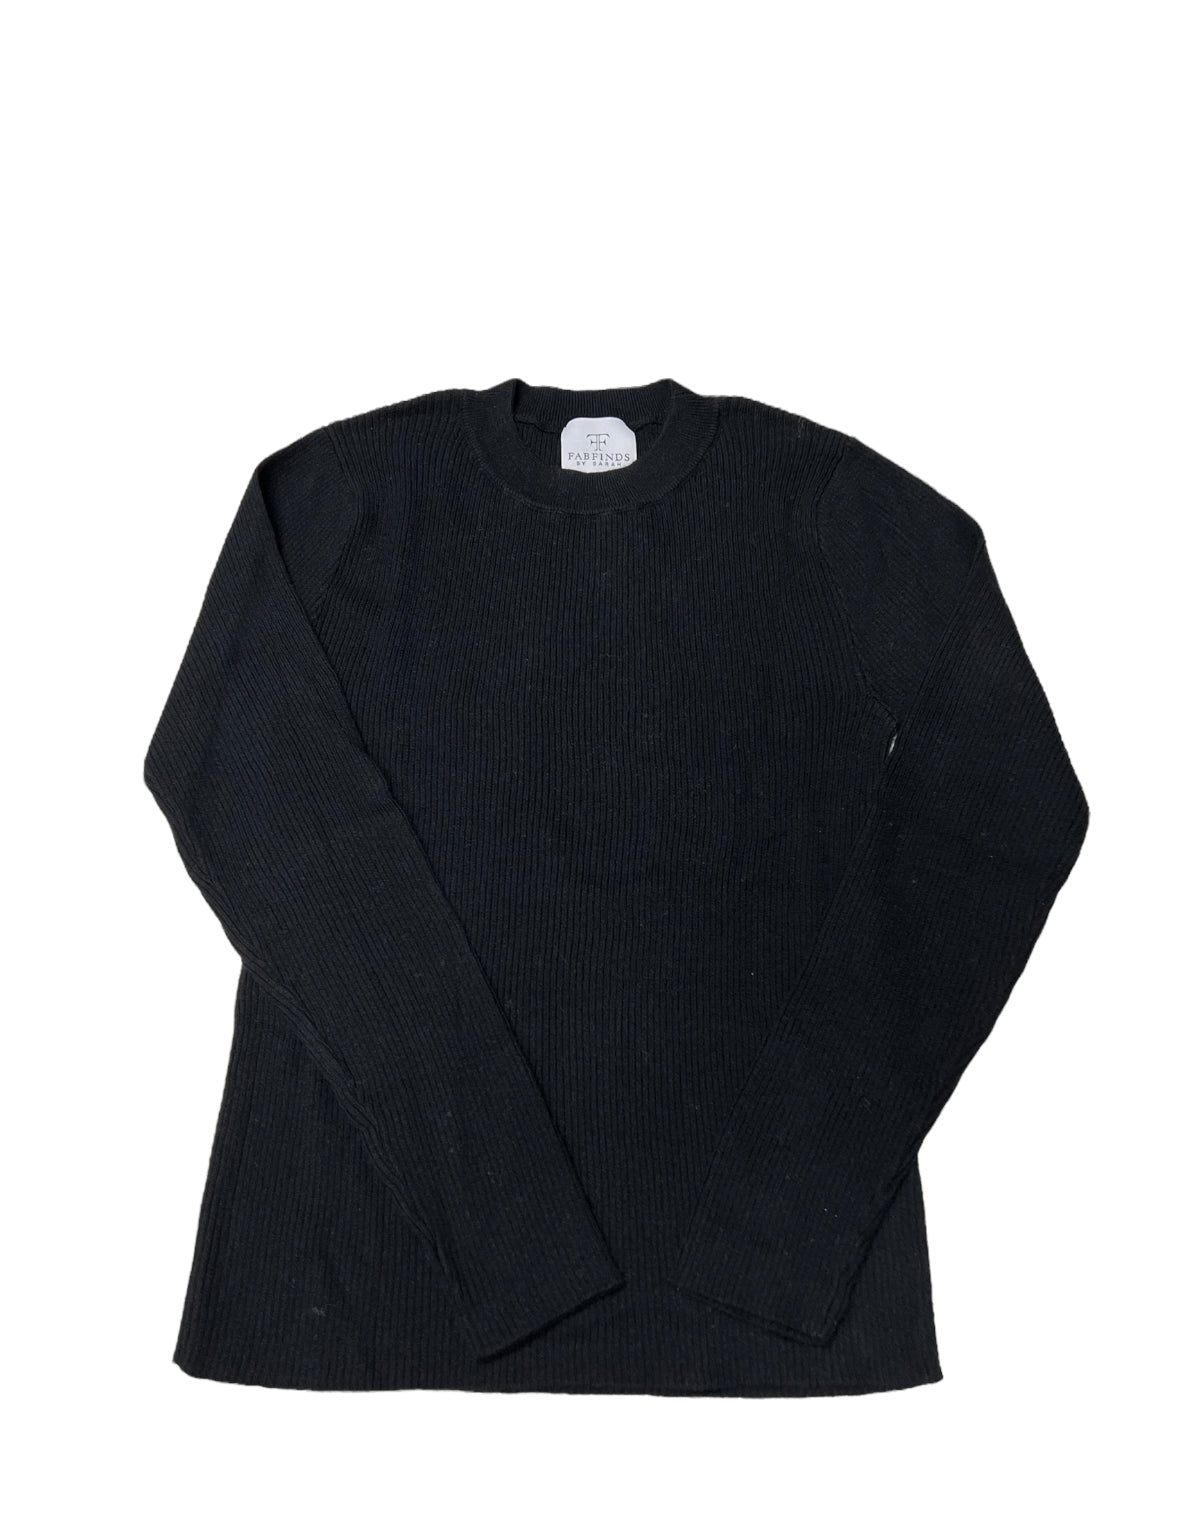 FFBS Round Neck Skinny L/S Top